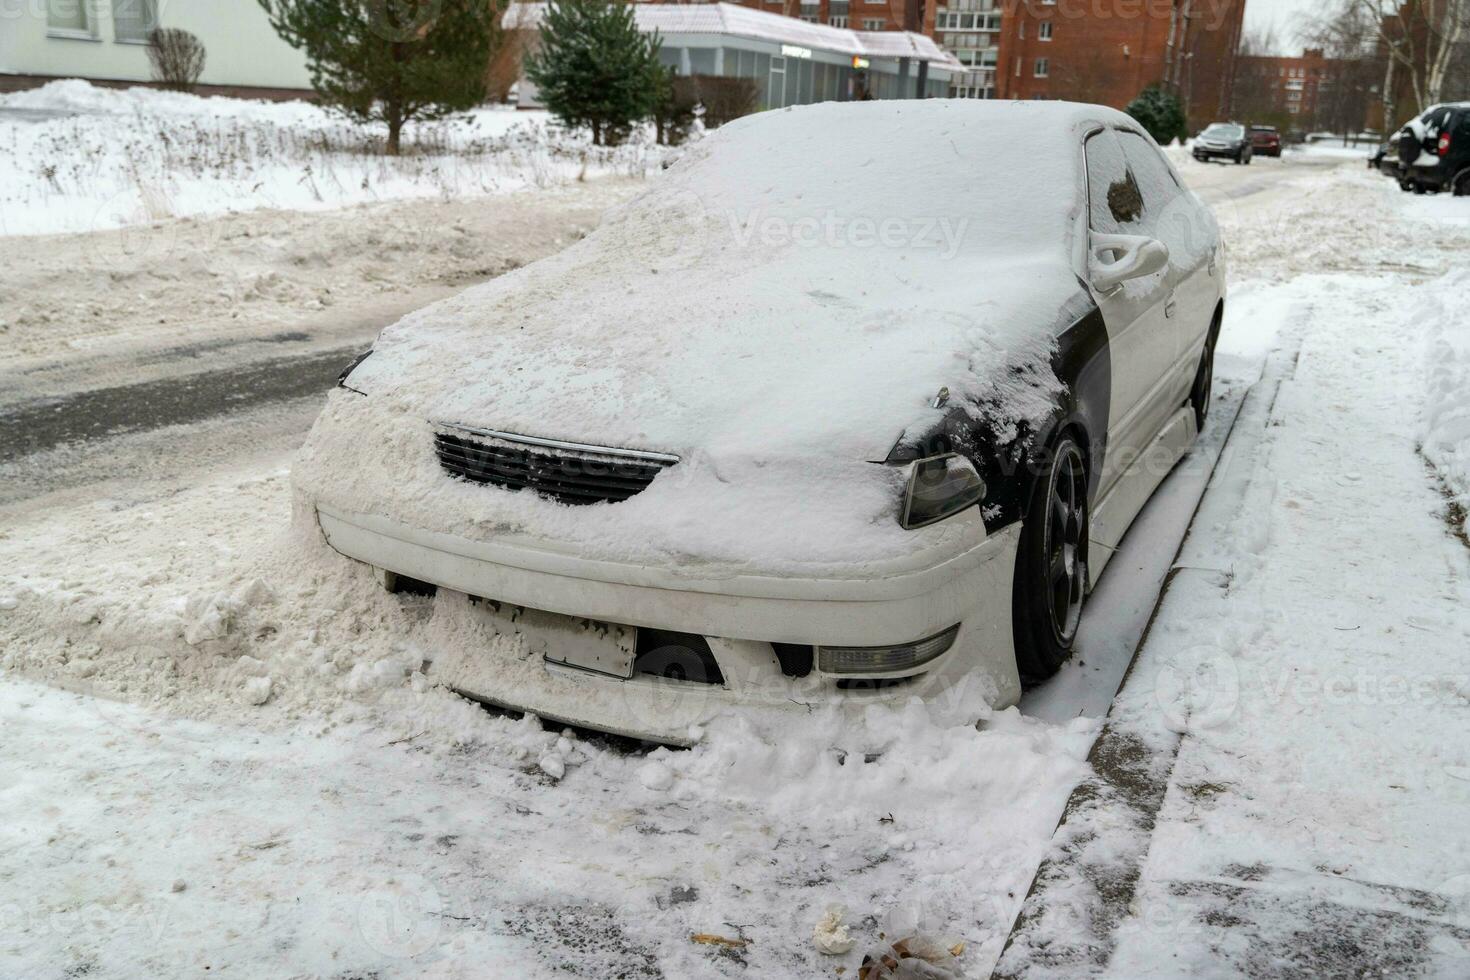 City street in winter with a car buried in snow after snow removal photo